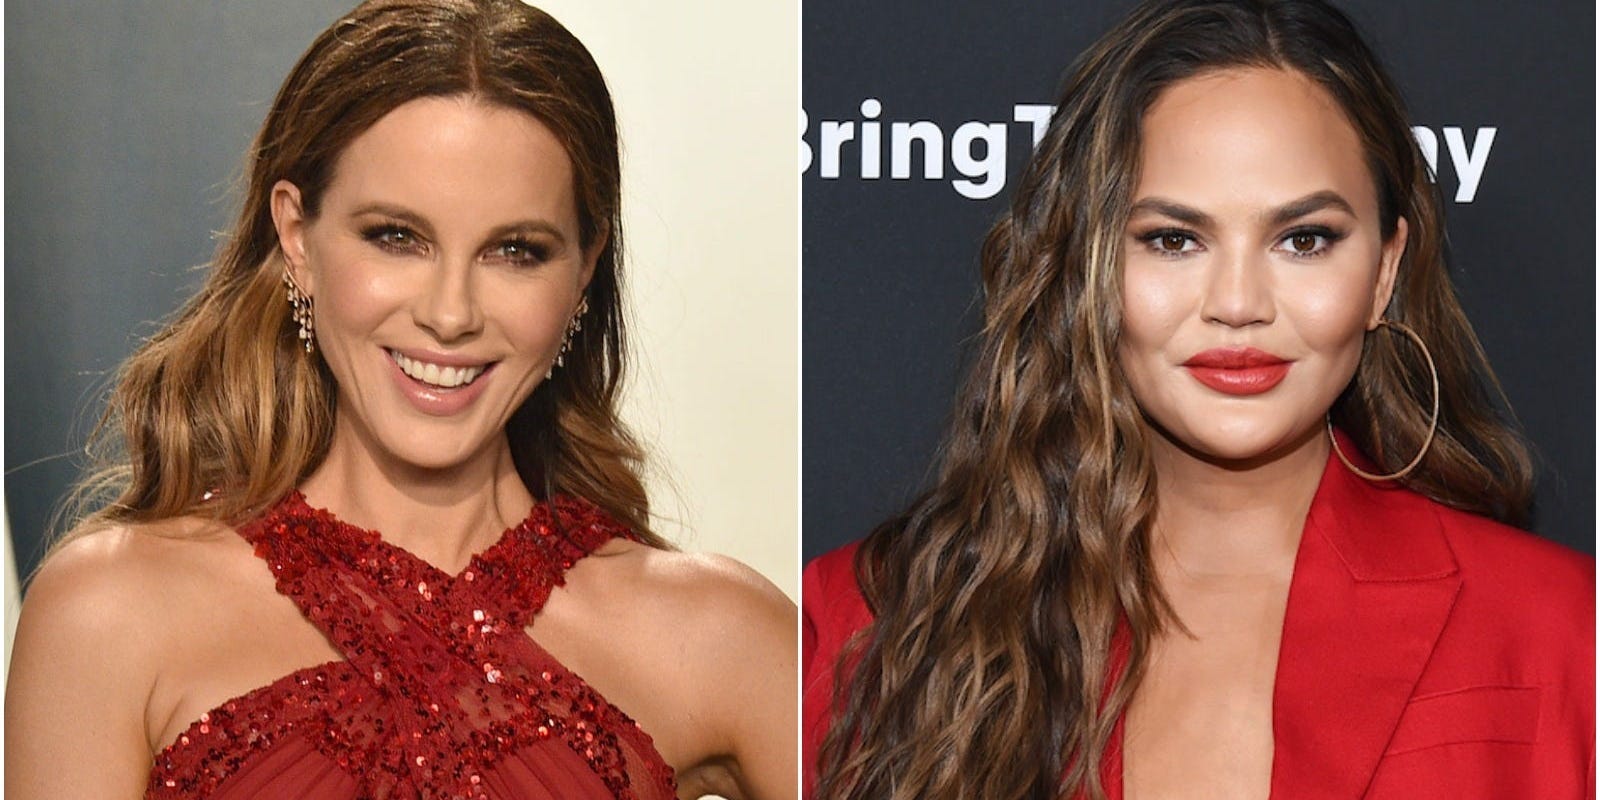 Kate Beckinsale shared her own miscarriage story to help support Chrissy Teigen.